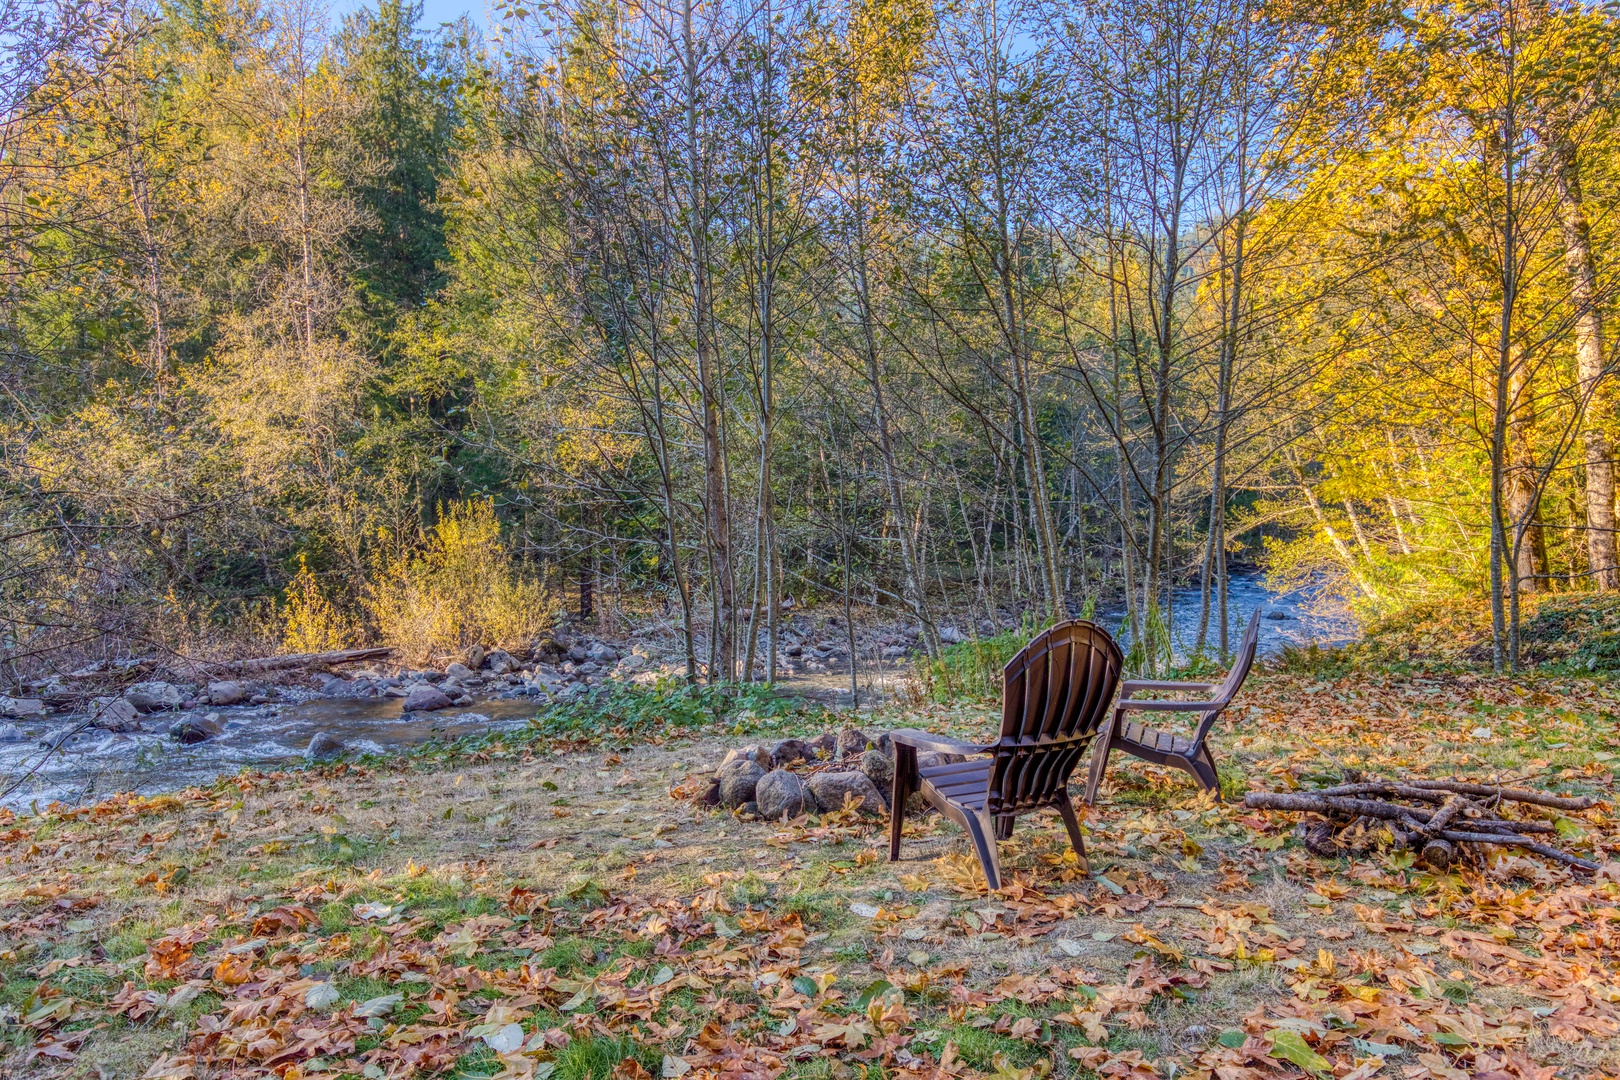 Rhododendron Vacation Rentals, Riverbend Cabin #1 - Nature